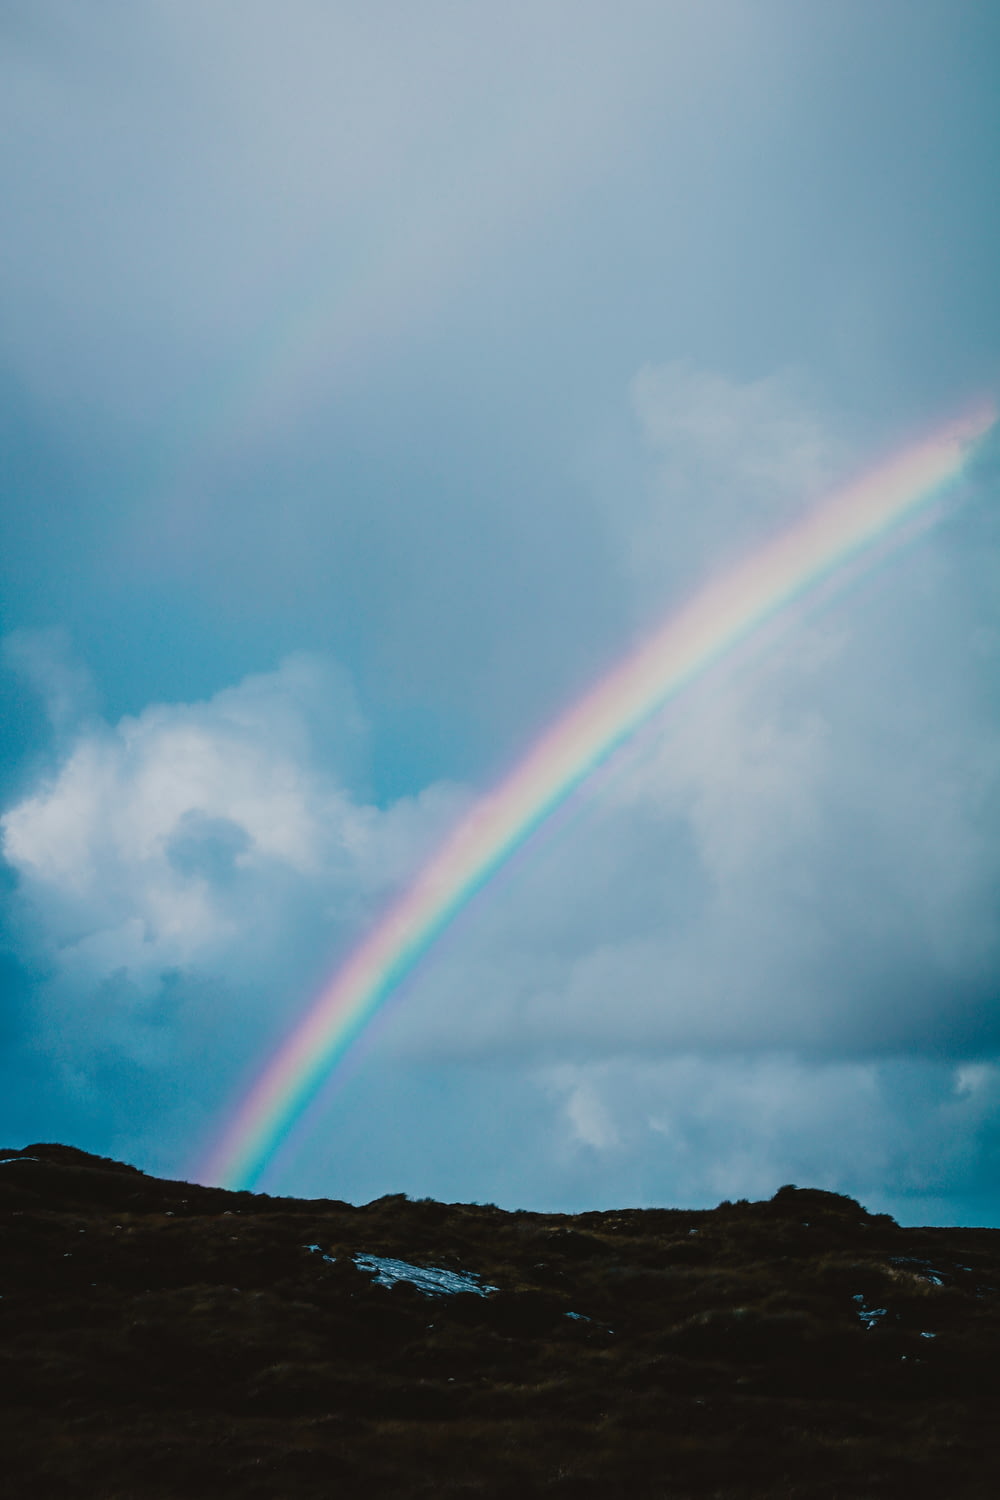 a rainbow appears in the sky above a hill